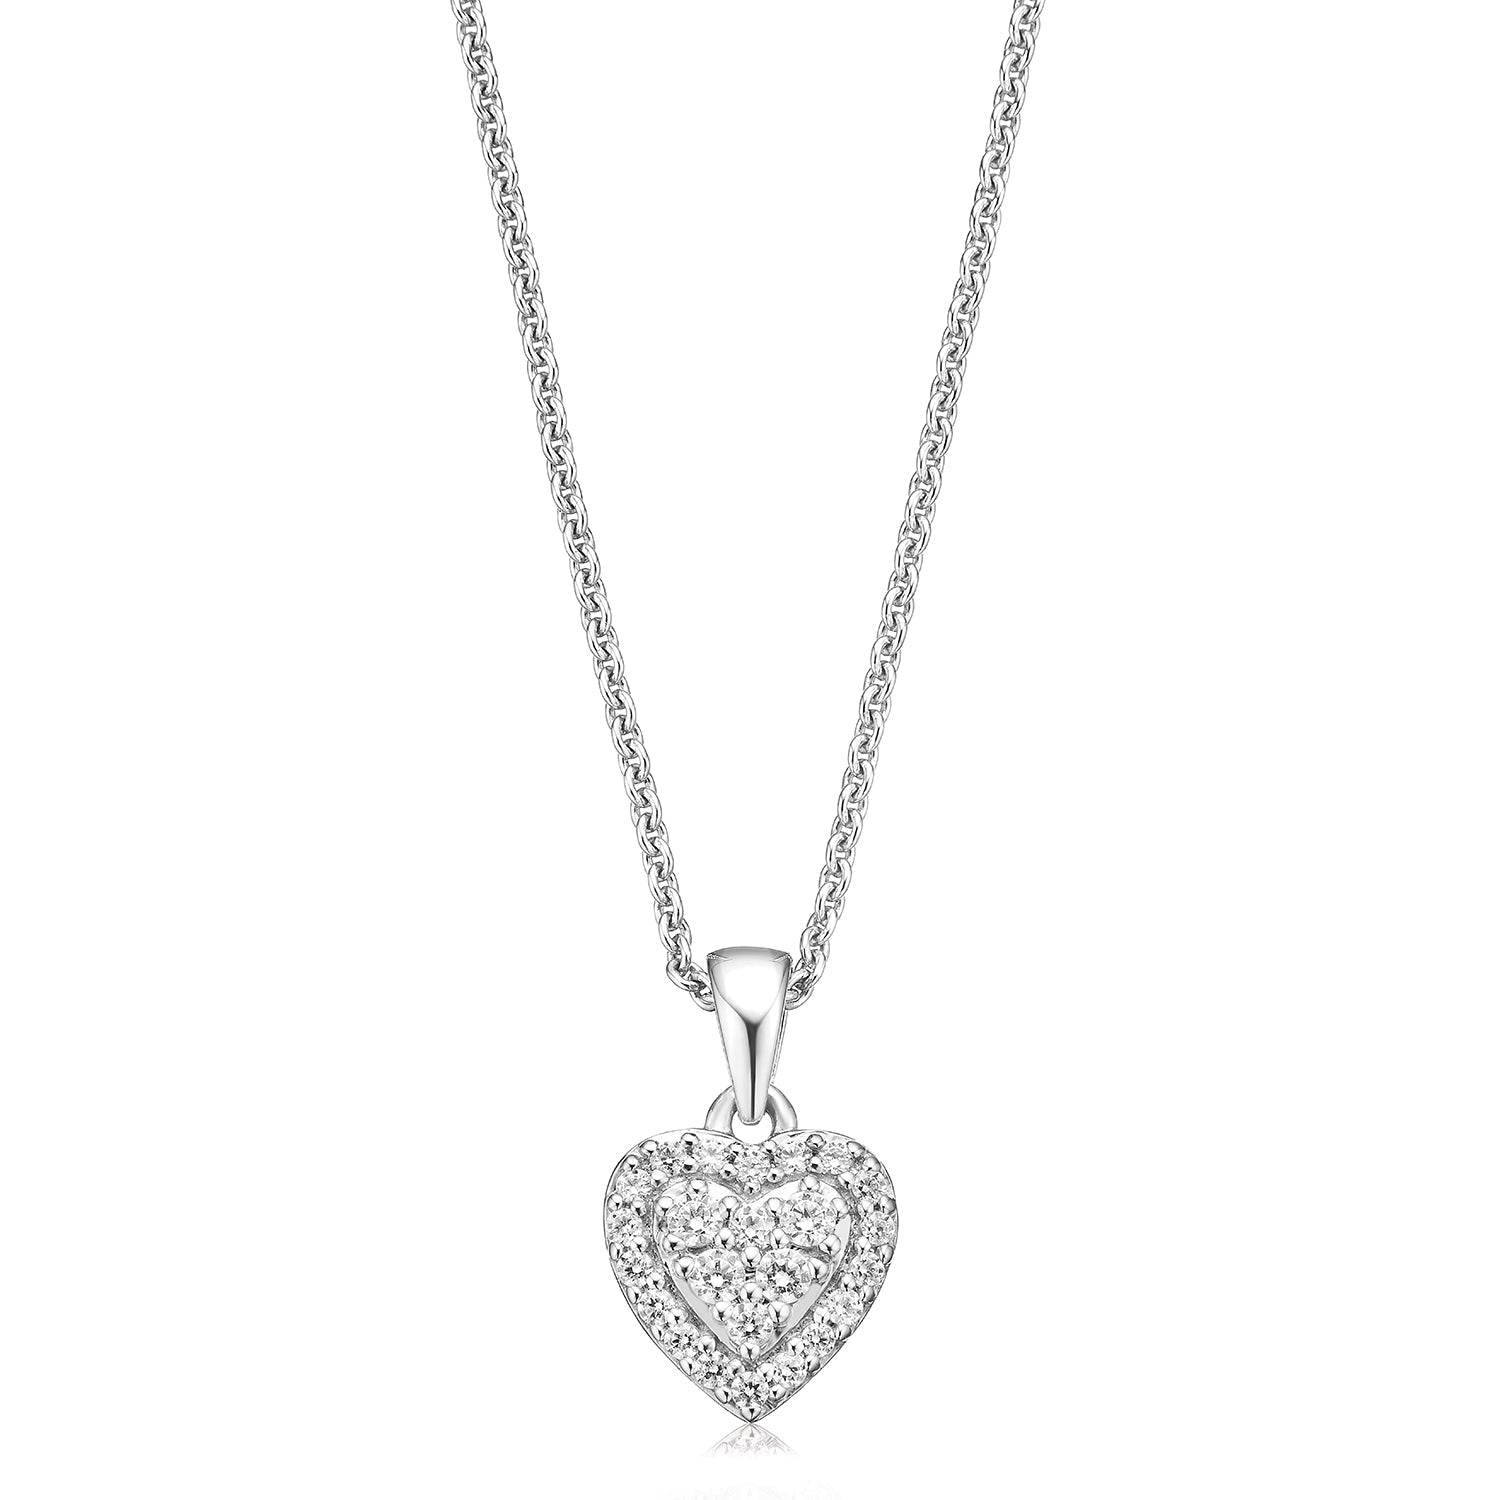 Ladies Diamond Necklace | White Gold Heart Necklace